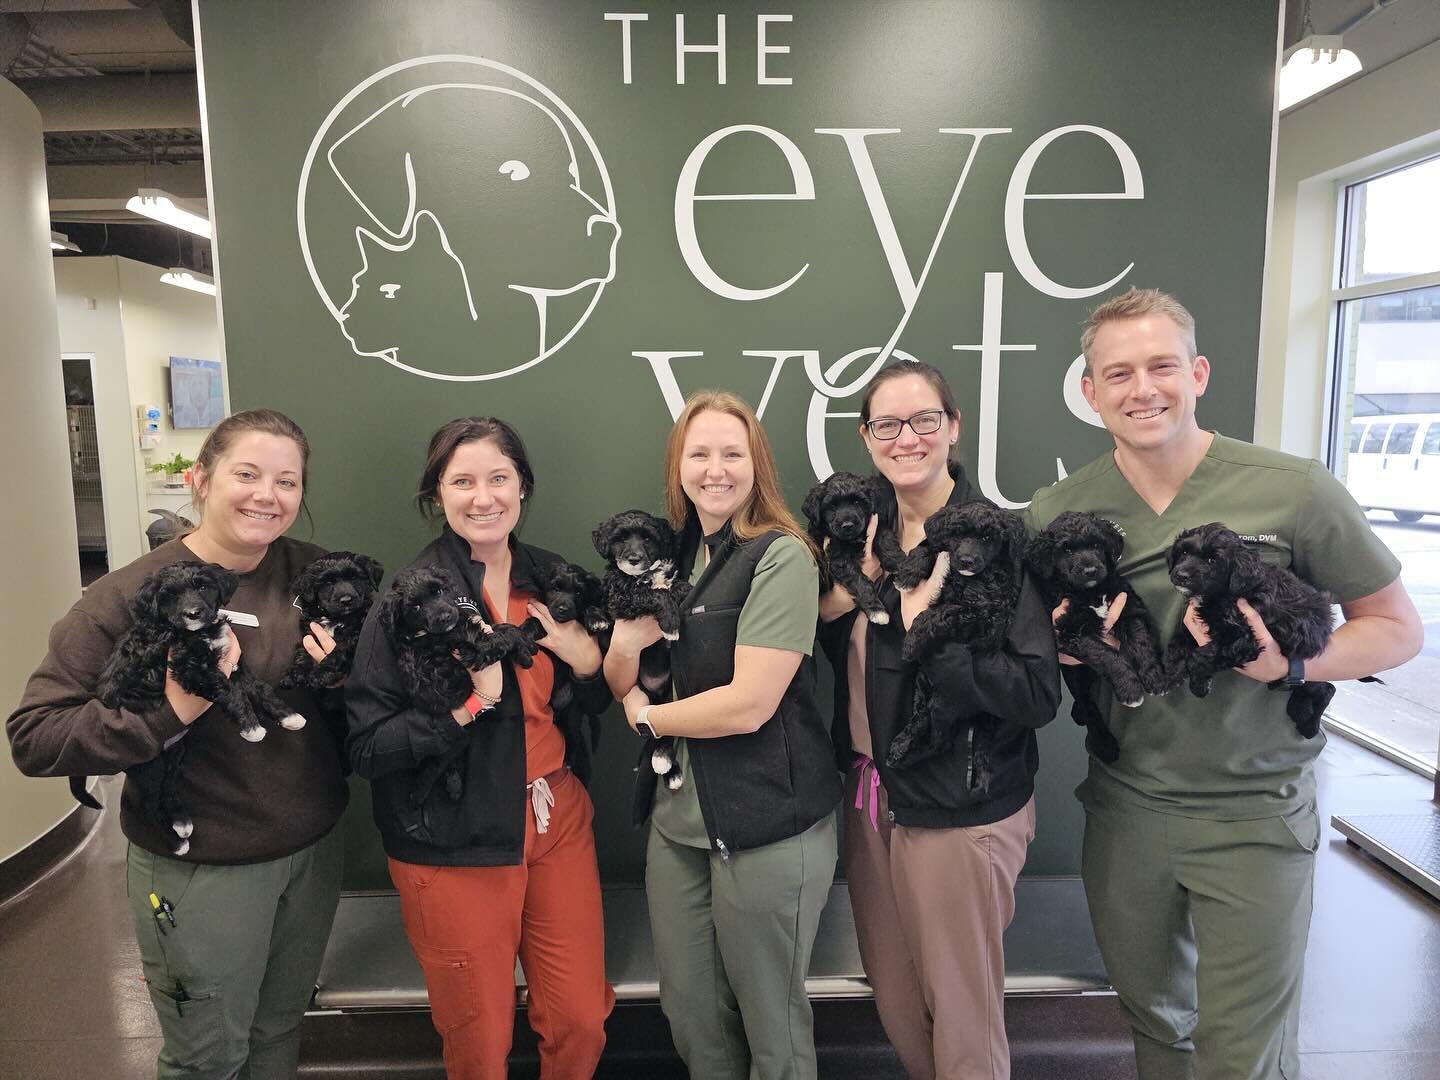 We perform eye exams on puppies too! Today it was NINE Portuguese water dog puppies to be exact!

The Orthopedic Foundation for Animals (OFA) runs the Companion Animal Eye Registry, formerly known as CERF. The purpose of the OFA eye exams is to provi